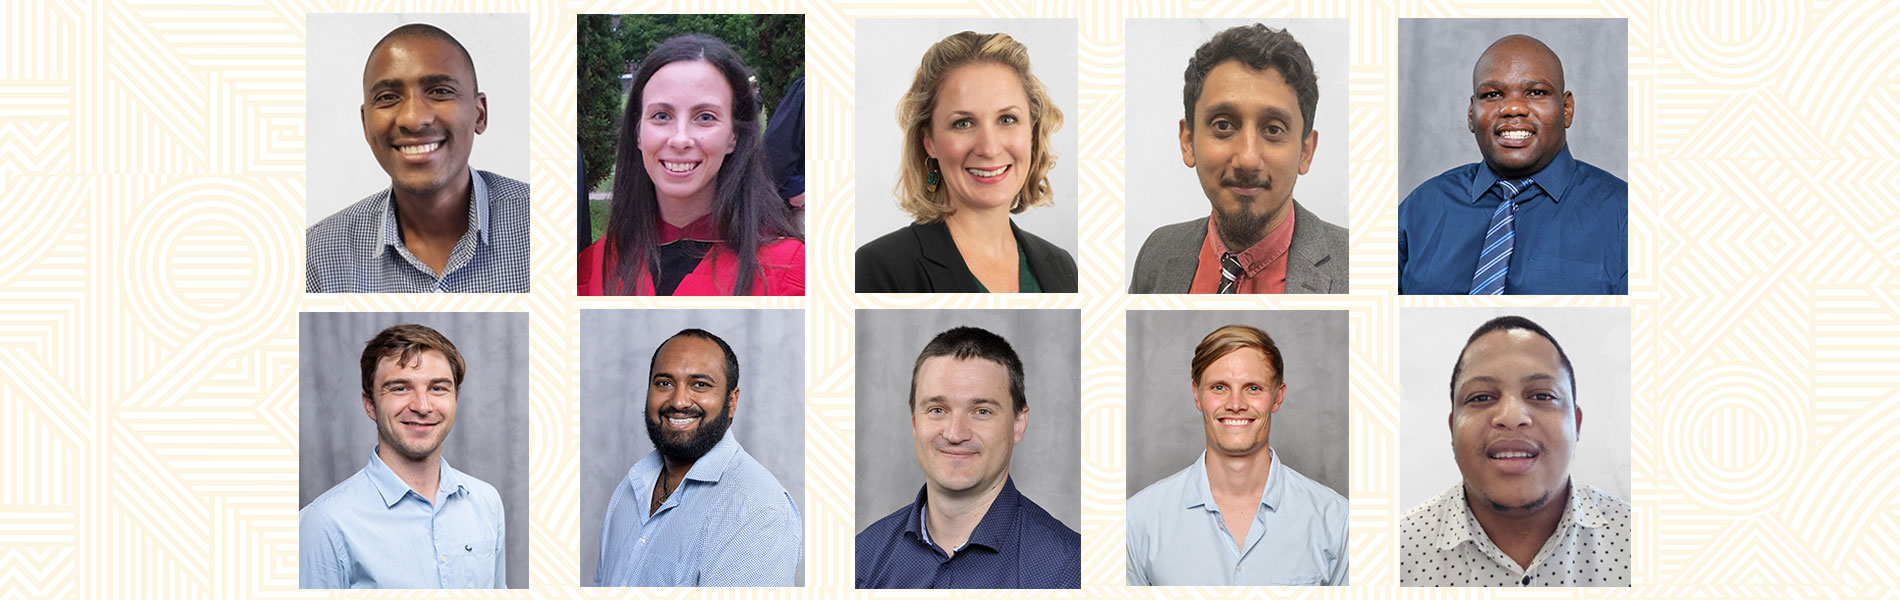 Introducing the latest academic staff members of the Faculty of Engineering